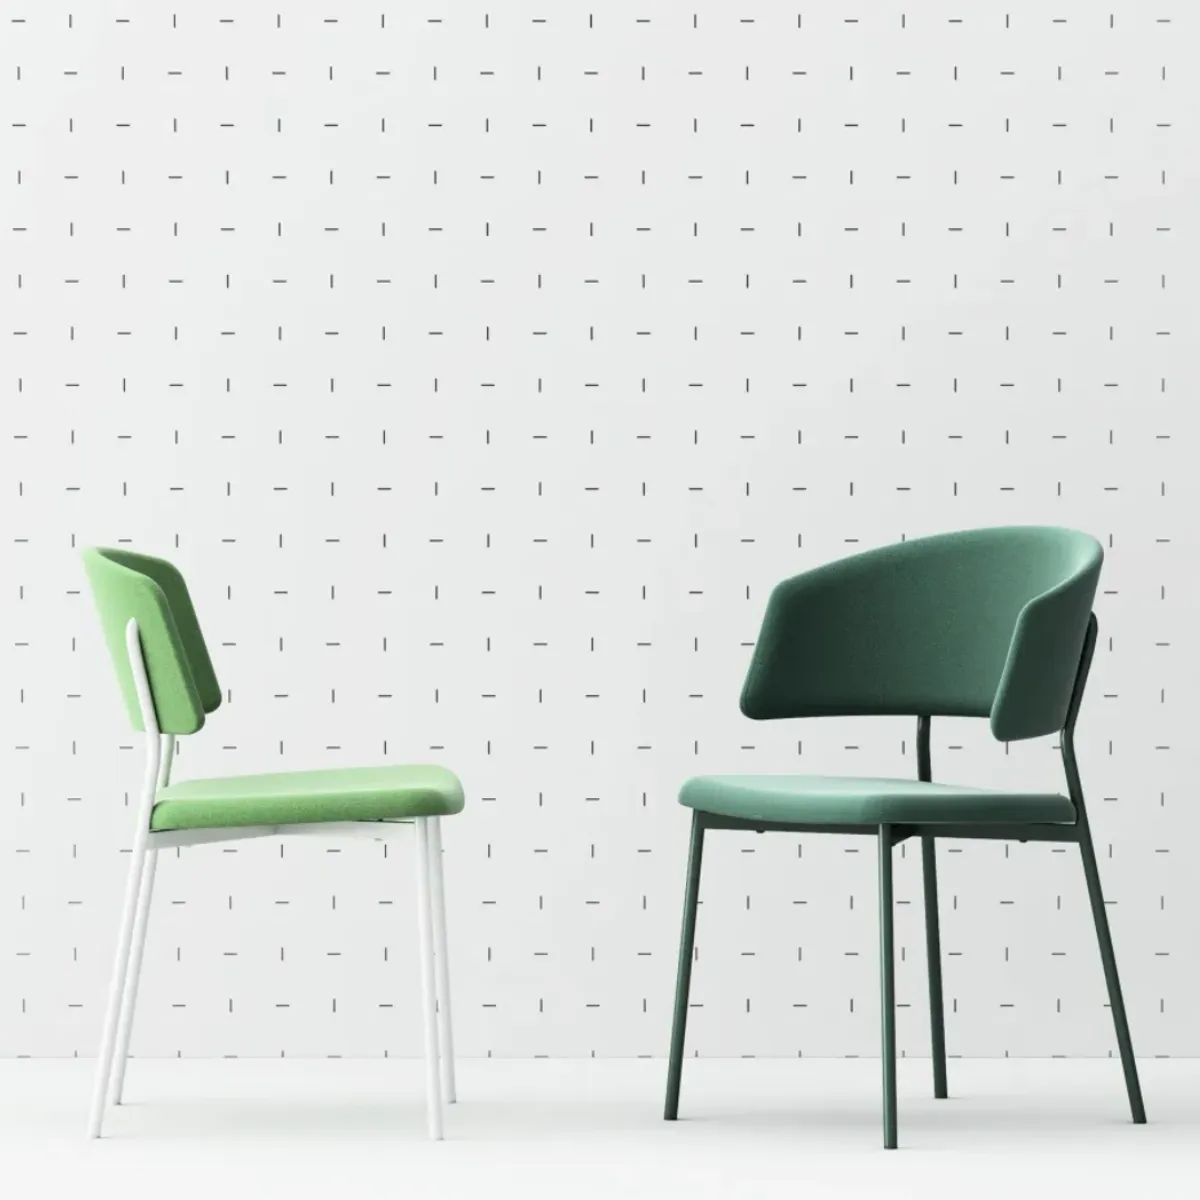 Minty curved chair 5